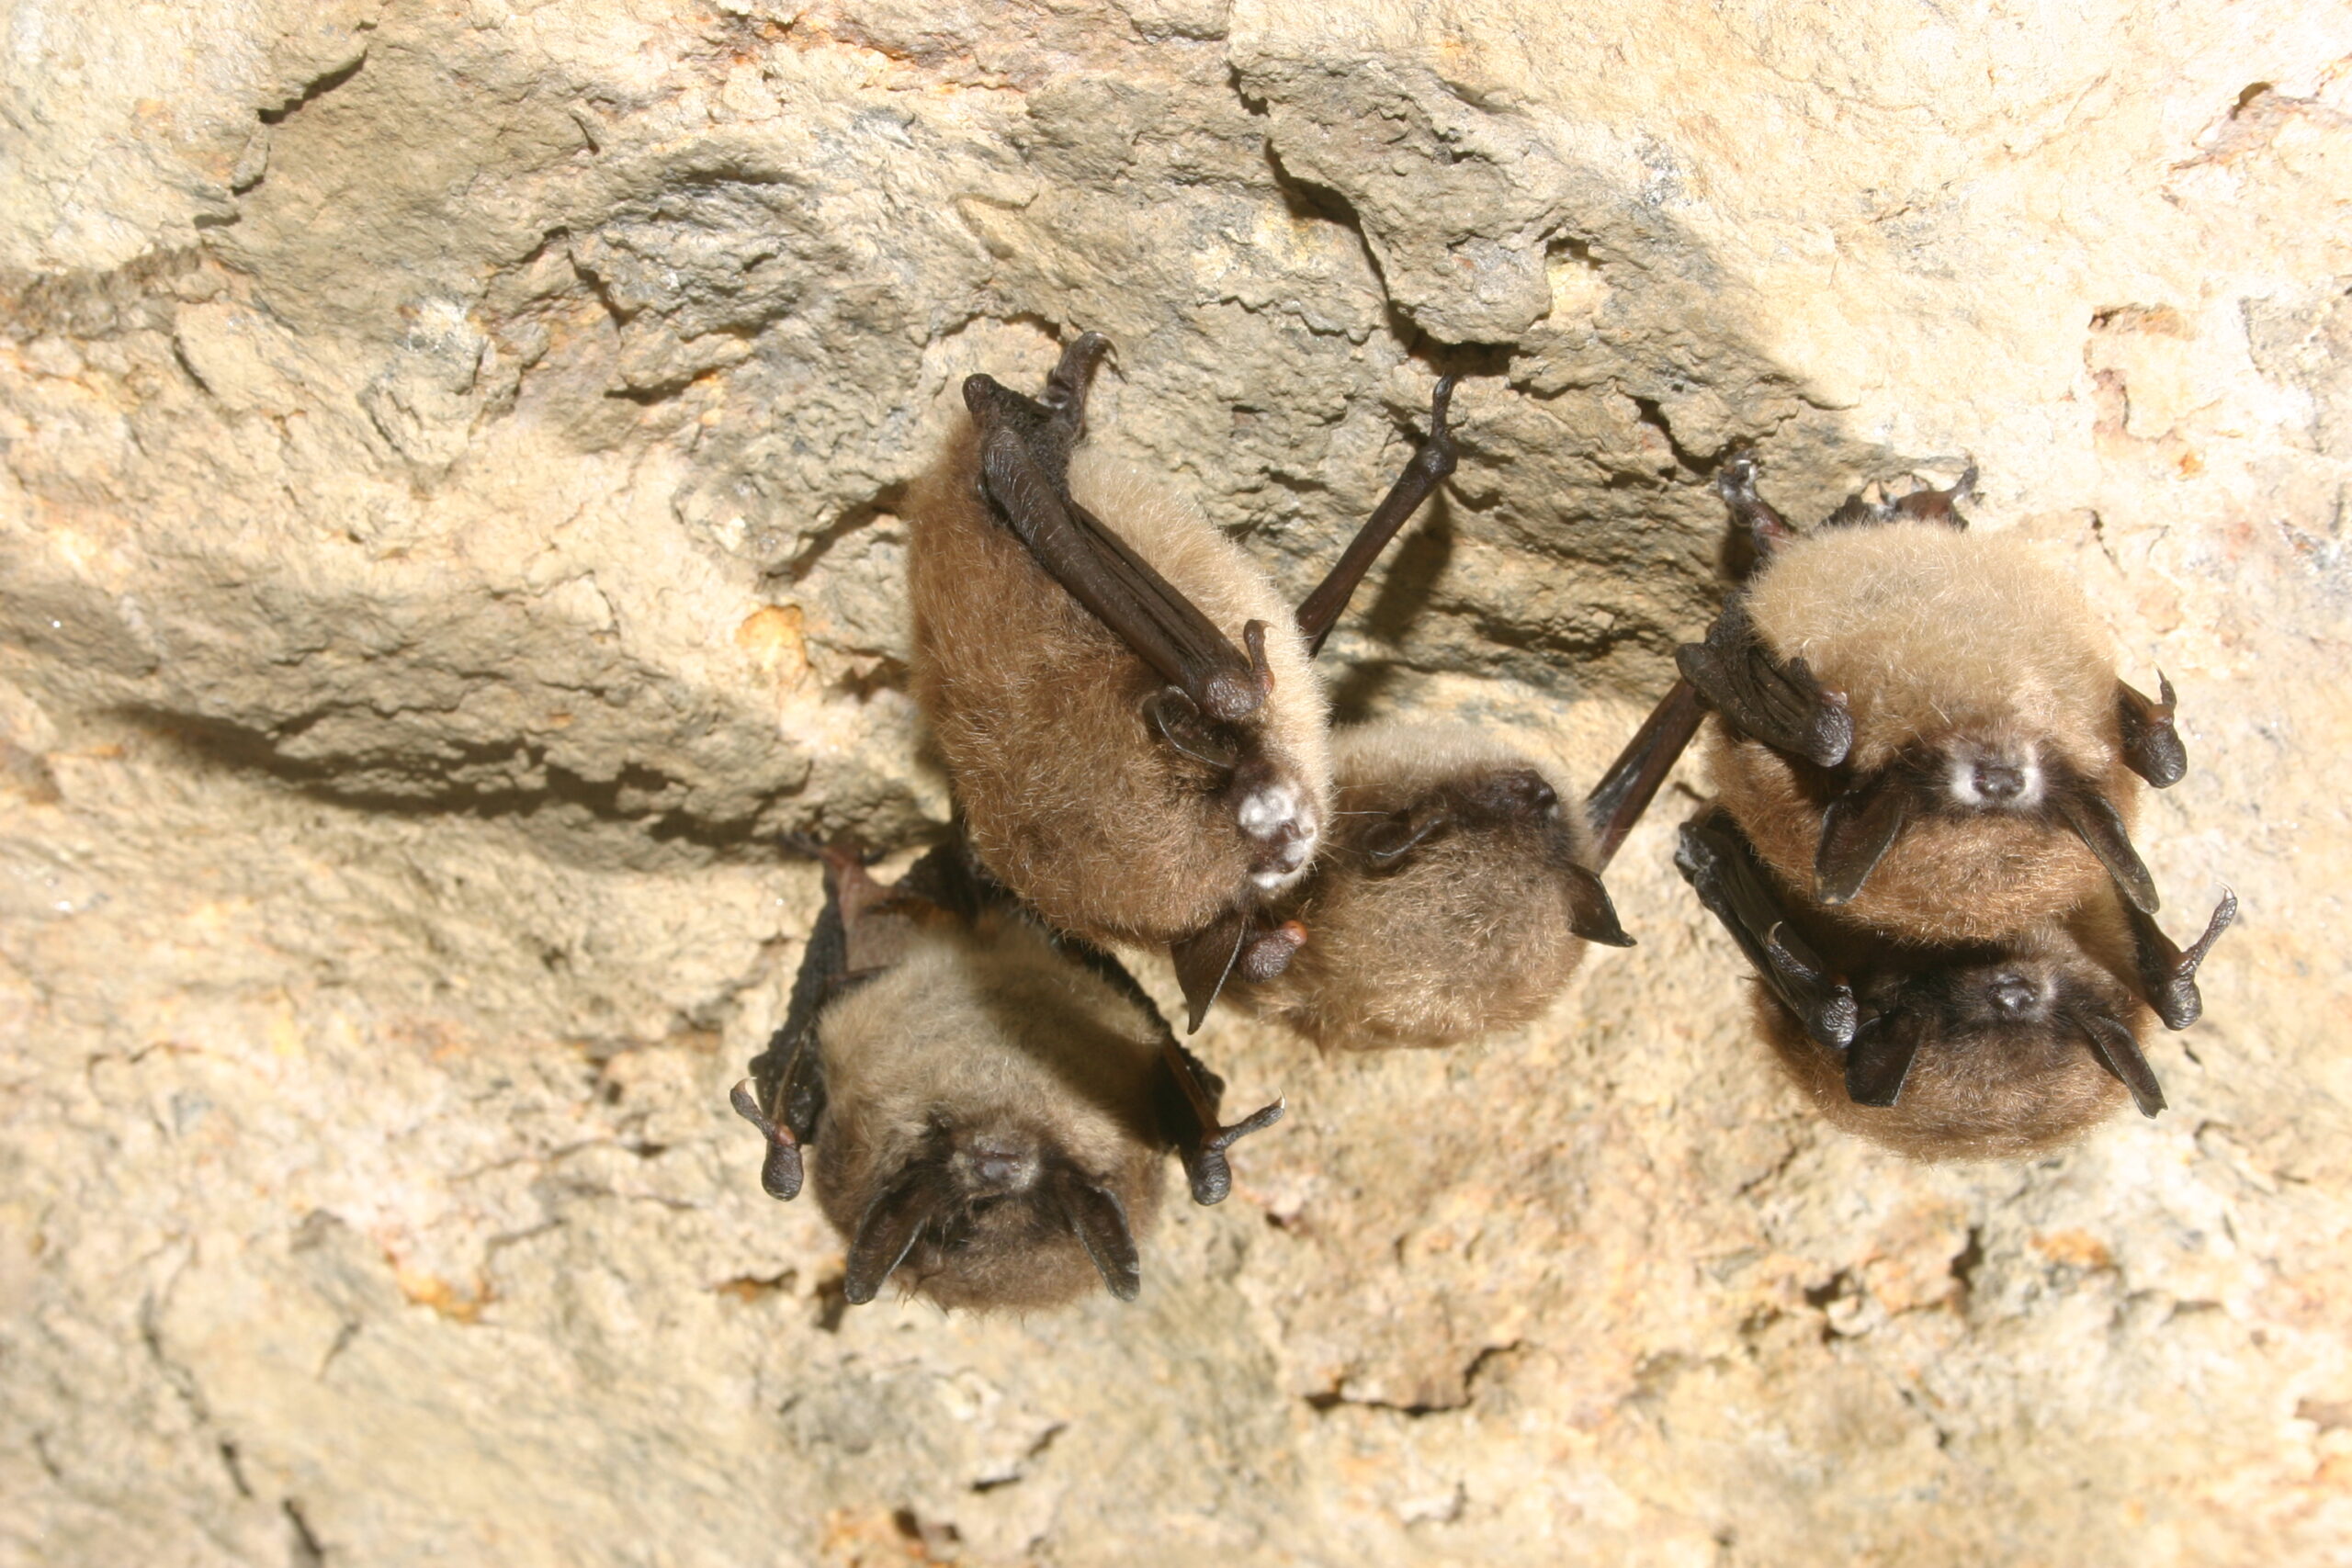 UW-Madison researchers studying new approach to protect bats from white-nose syndrome